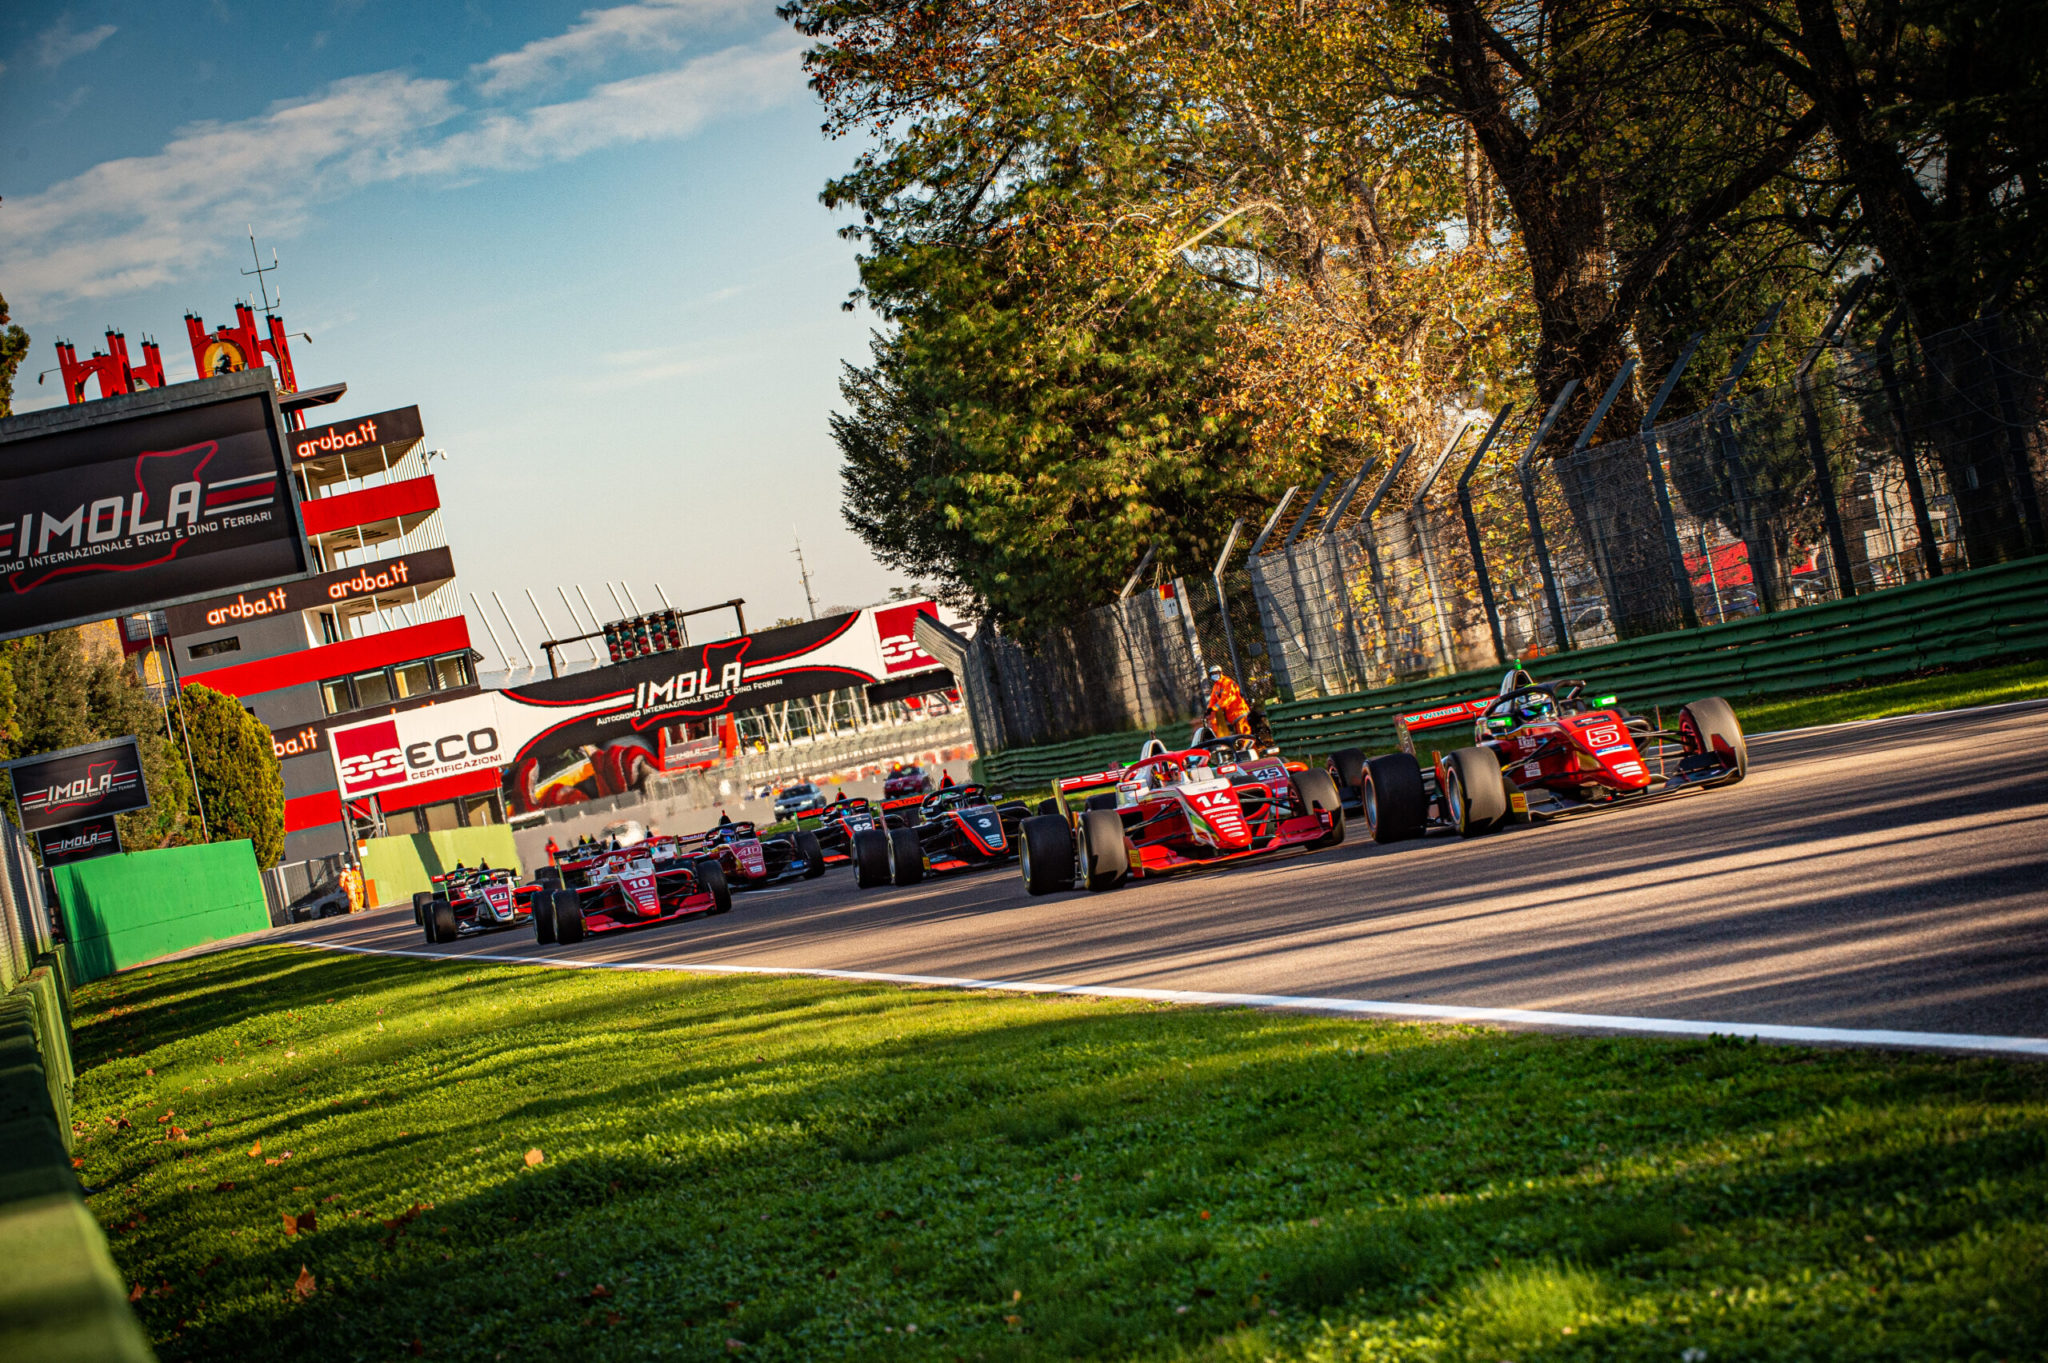 The Imola Grand Prix The Made In Italy Racetrack Life In Italy